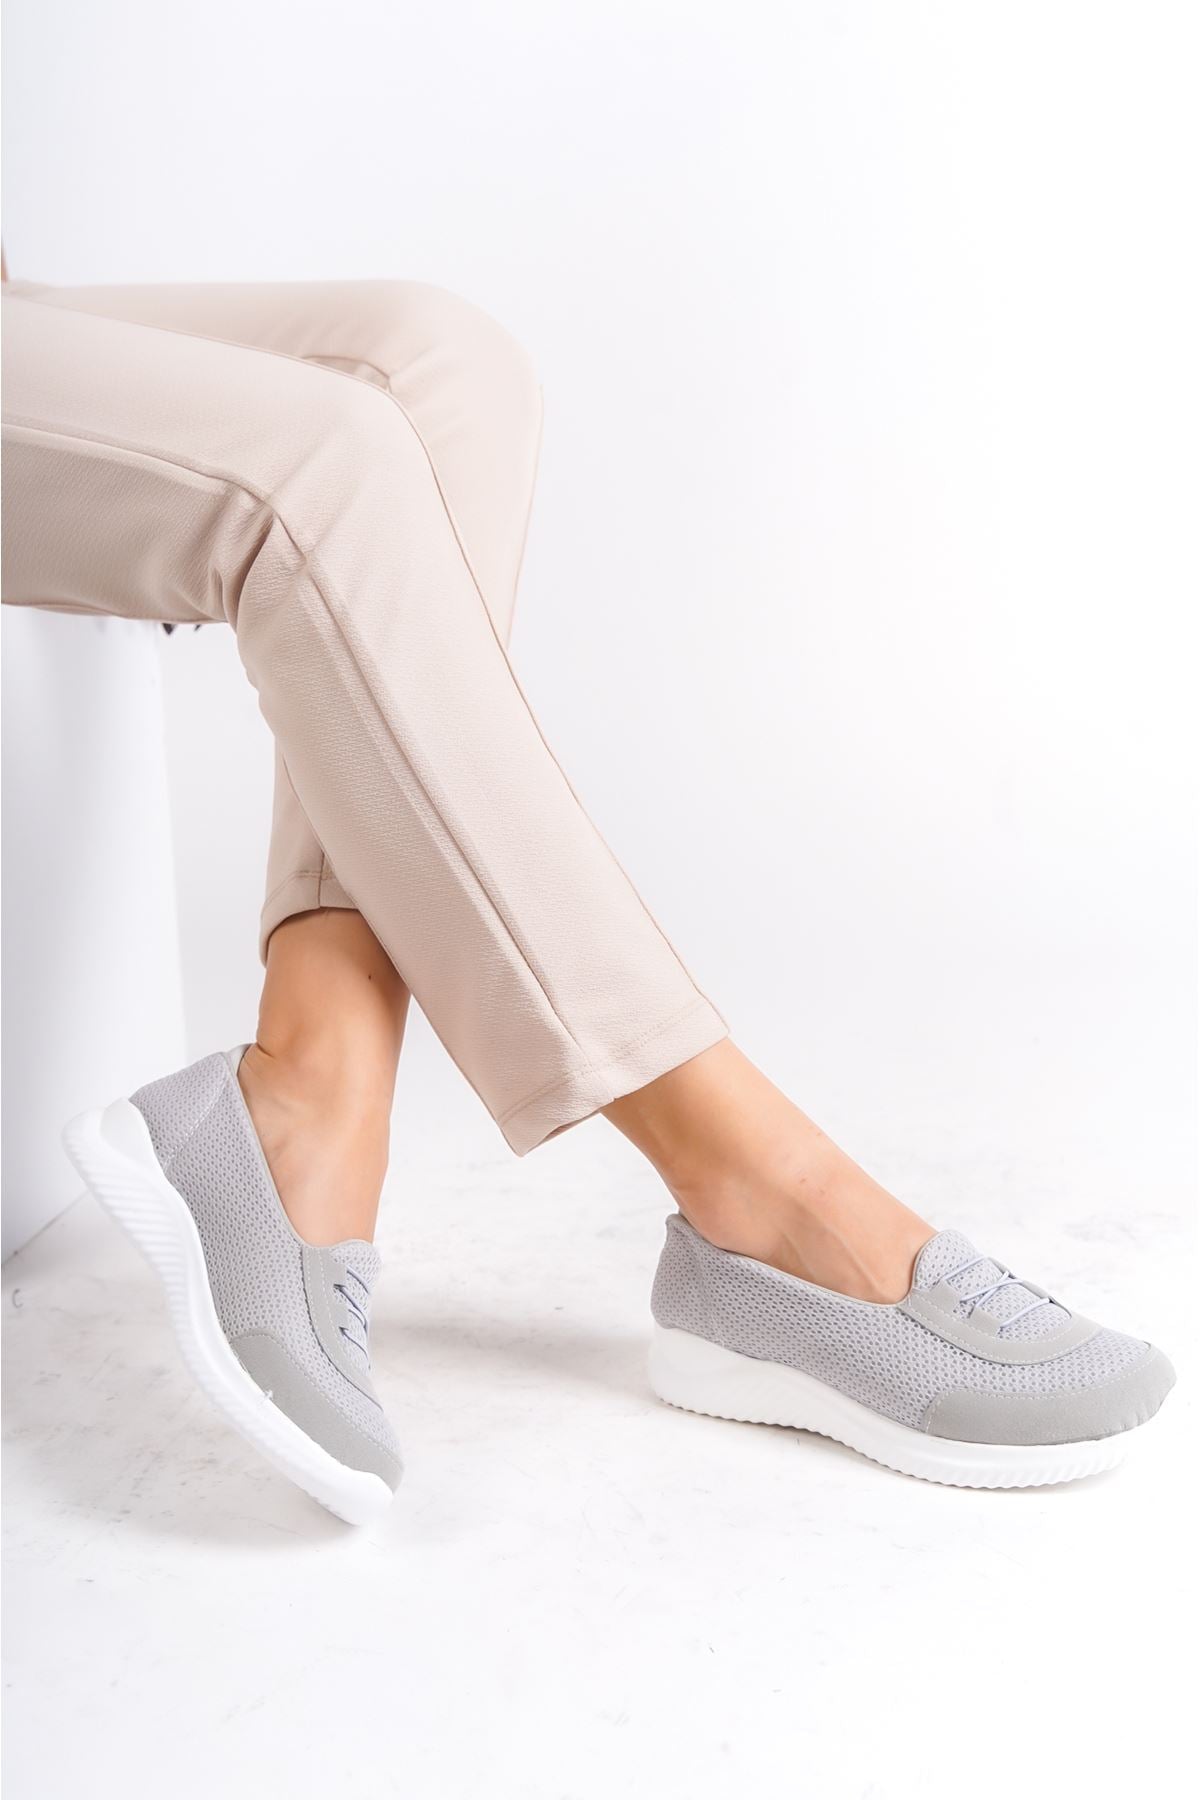 Women's Werva Comfortable Soft Sole Laceless Sports Shoes - STREETMODE ™